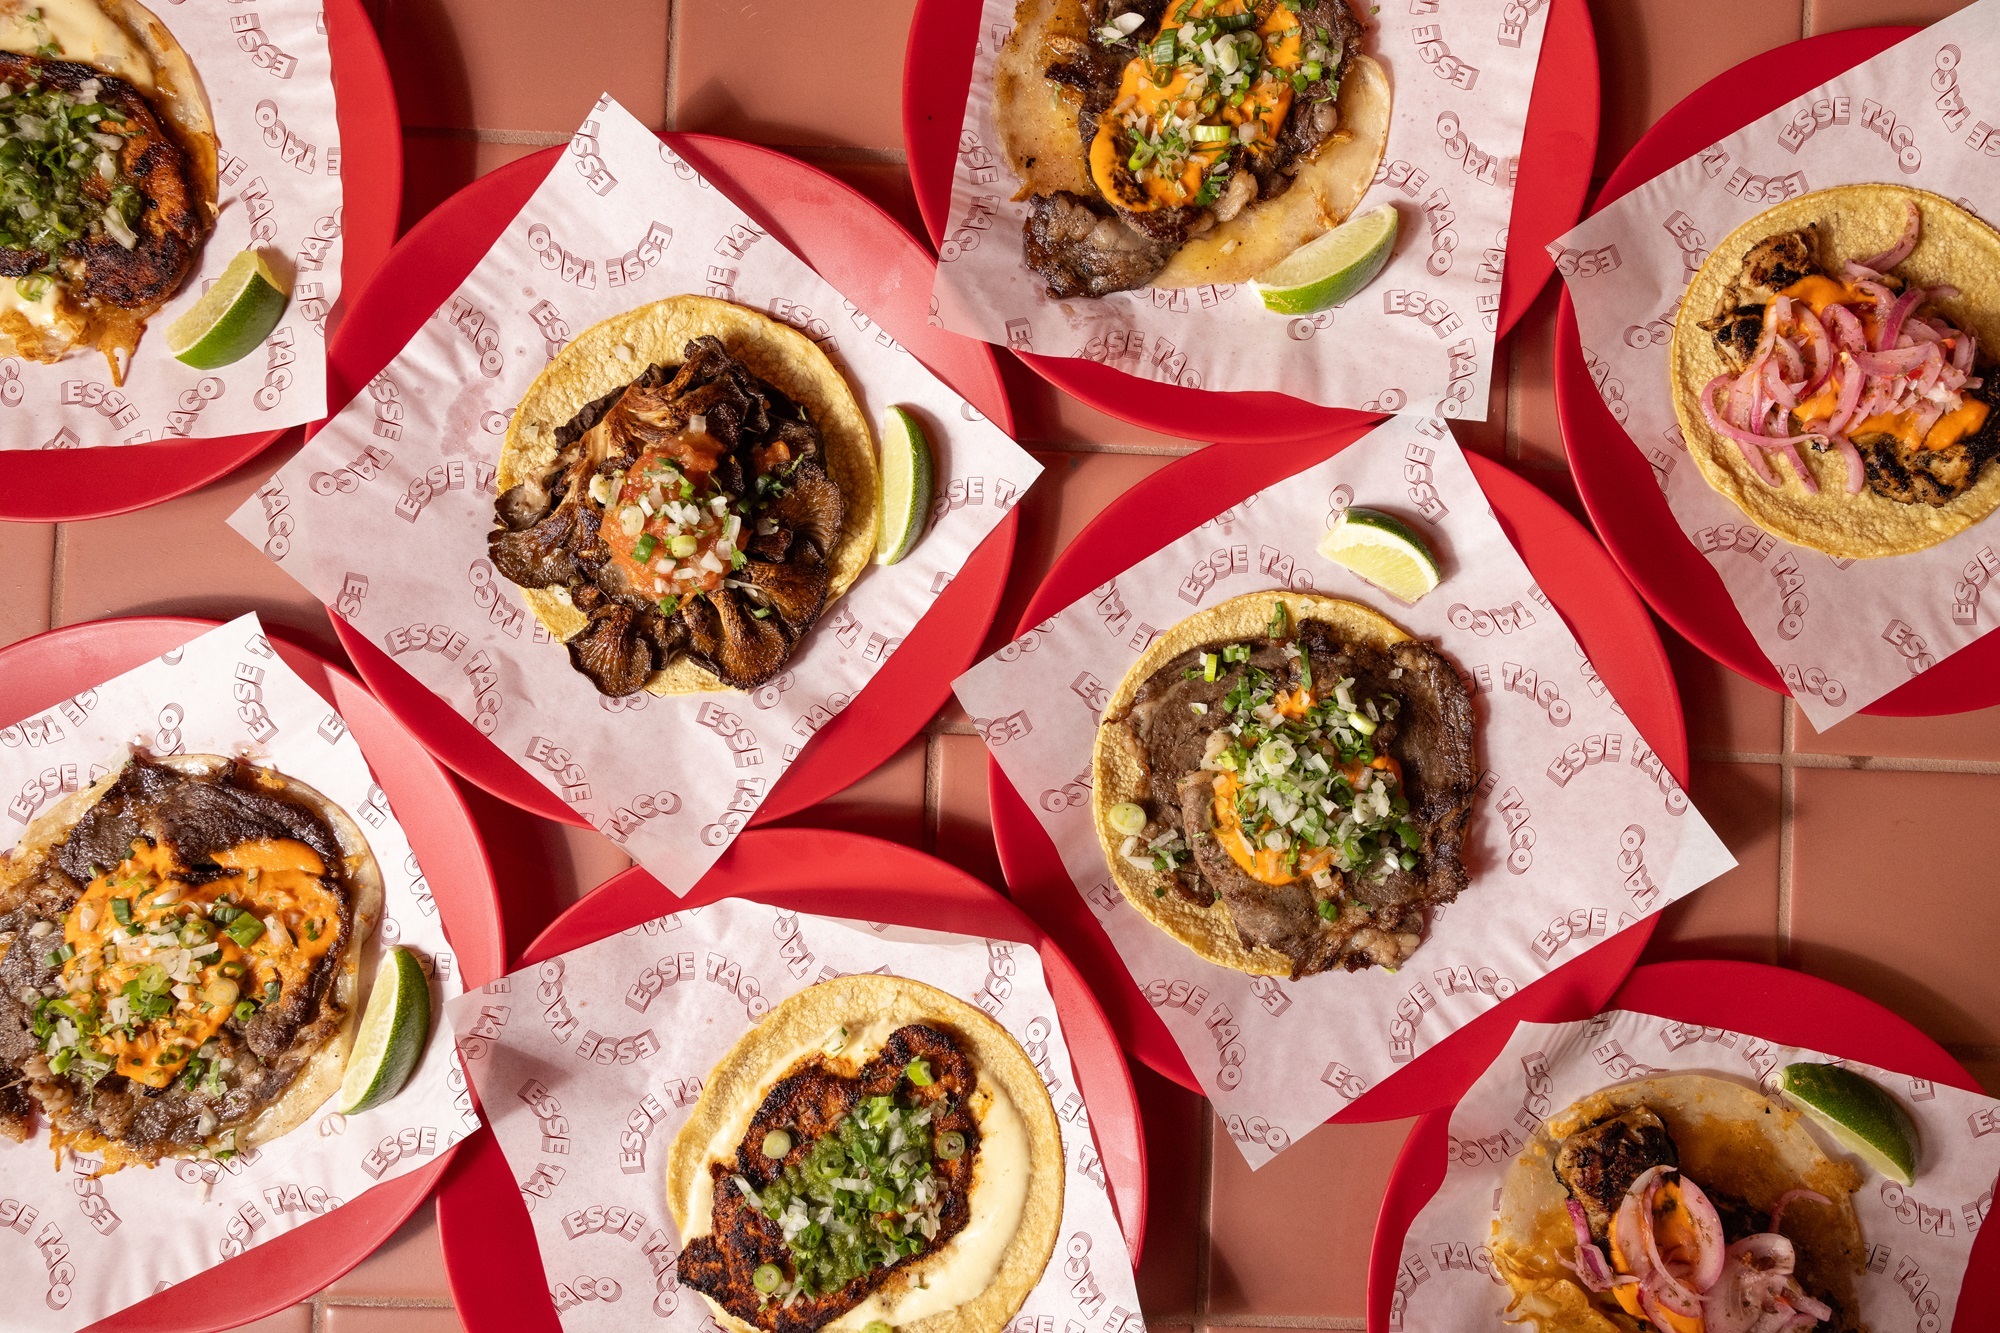 One of NYC's premier Mexican chefs opens Esse Taco this week